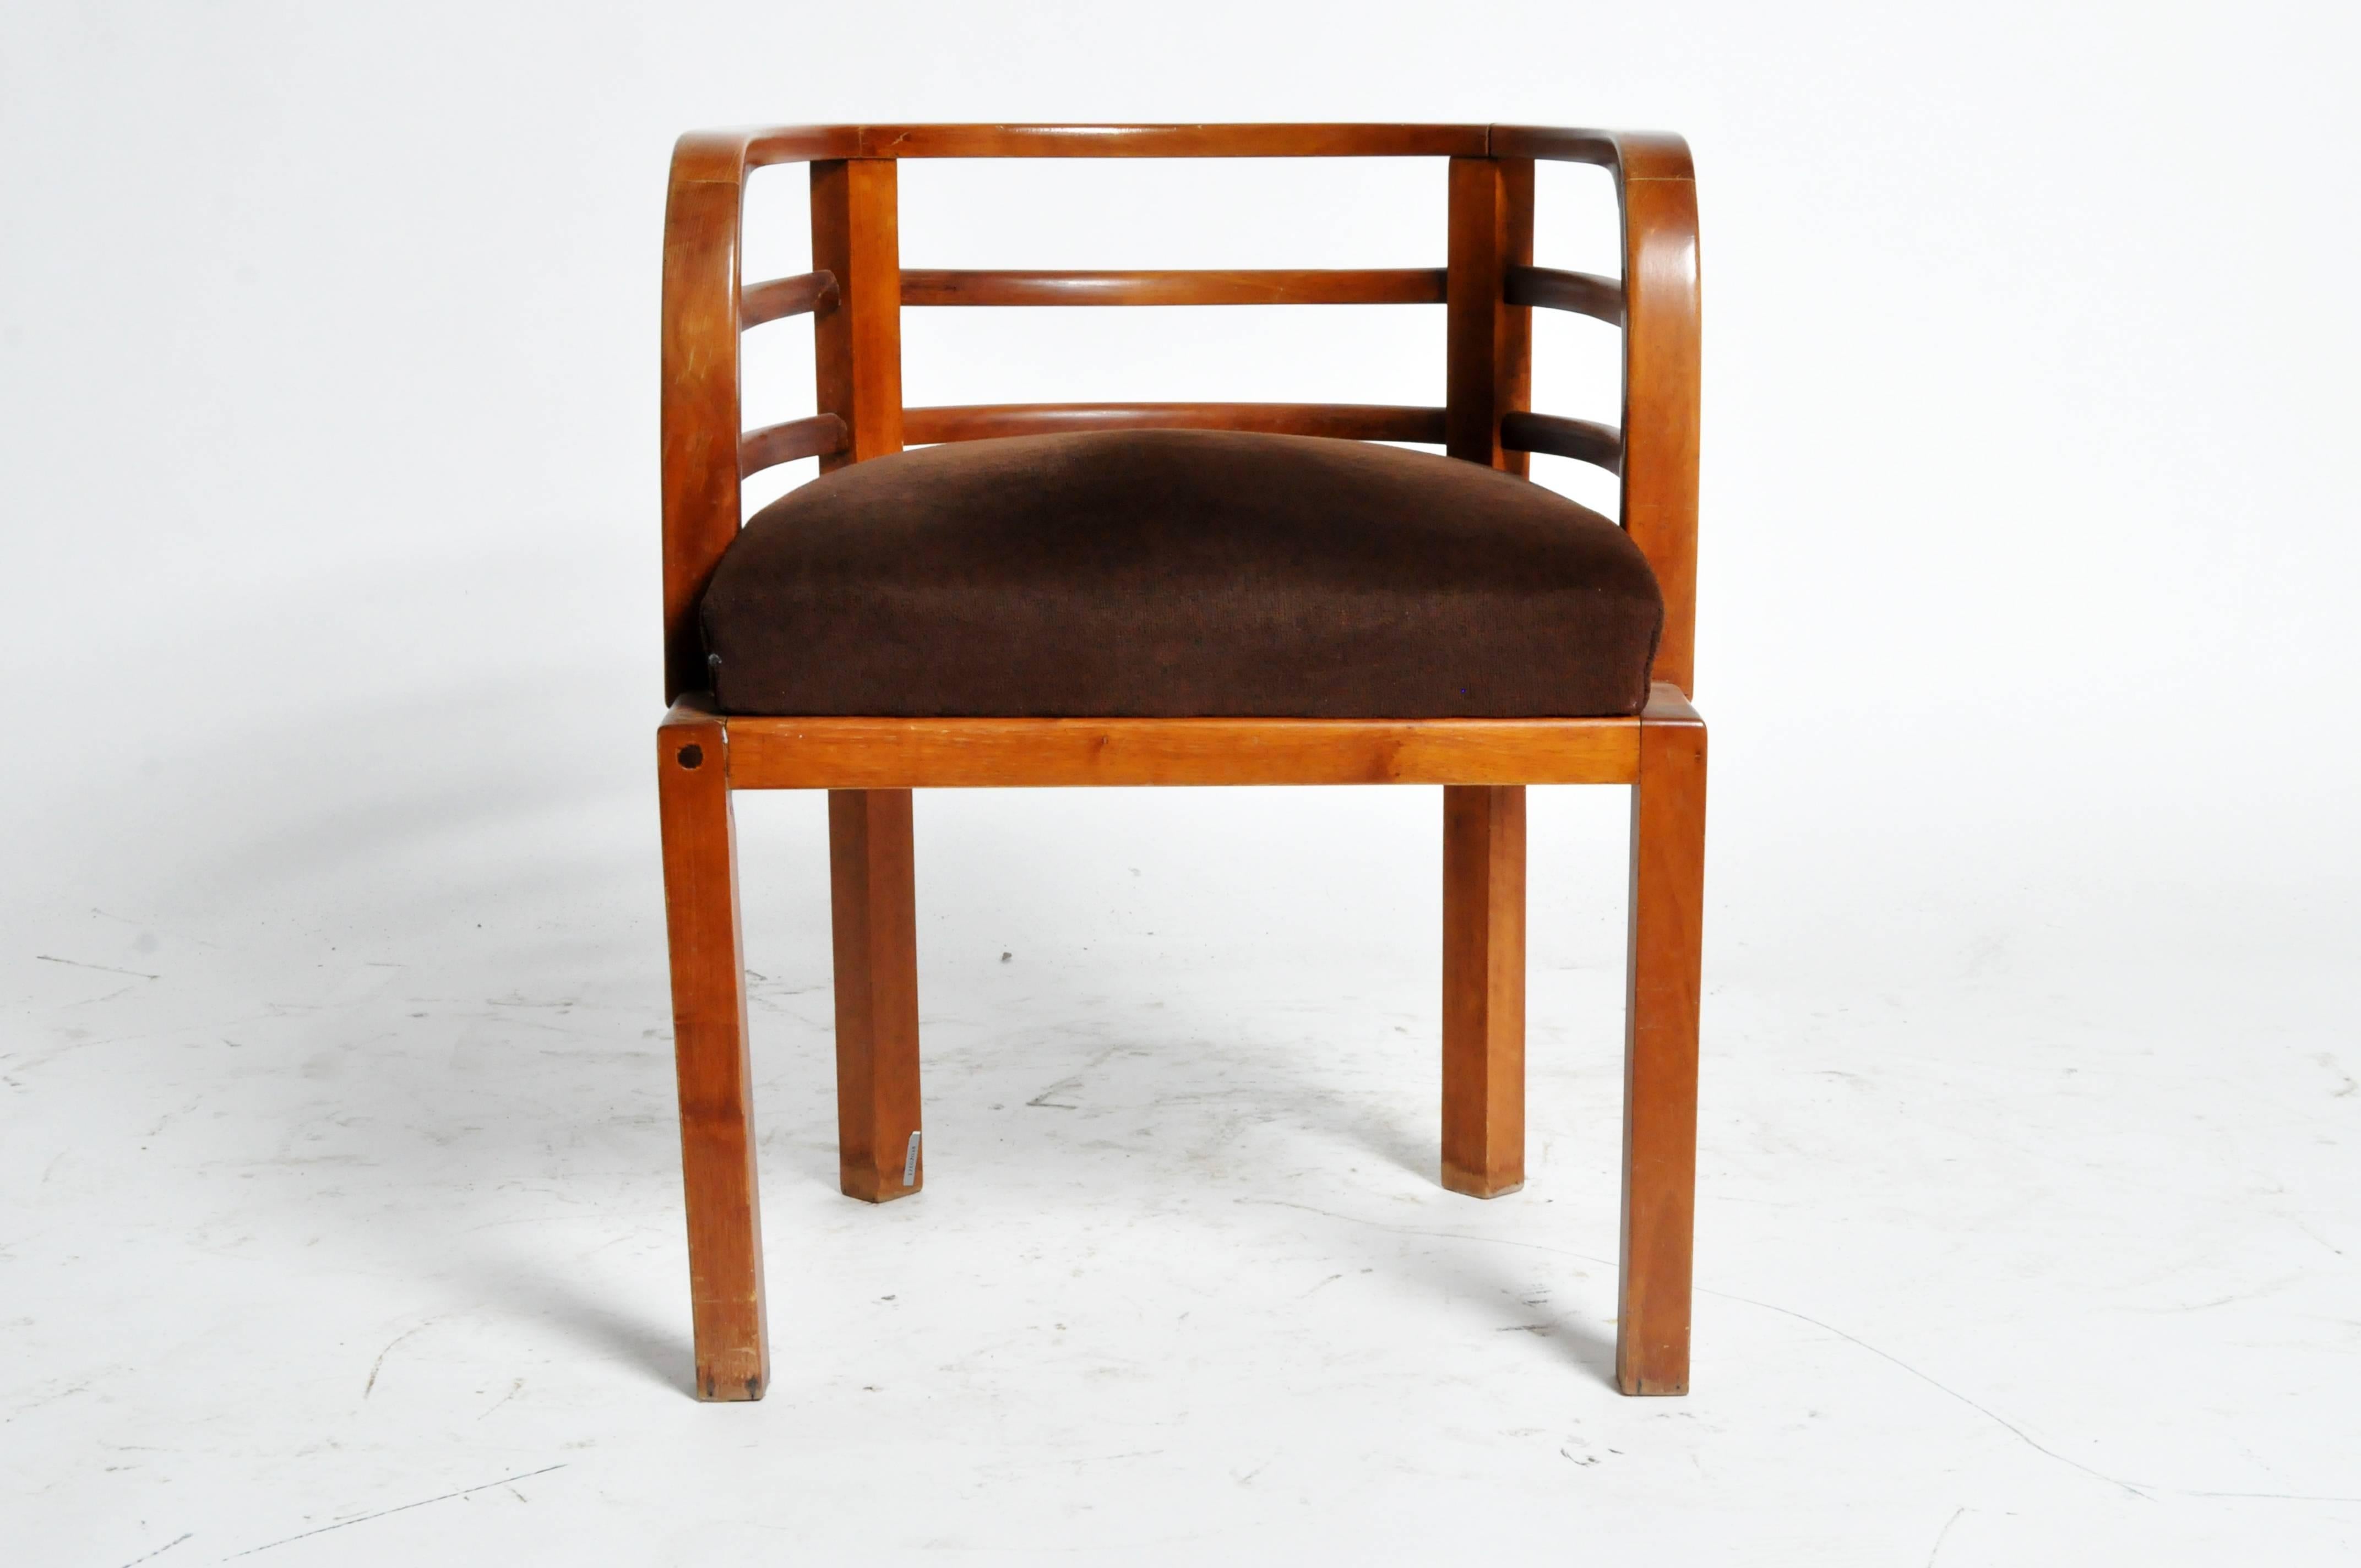 Eye-catching Hungarian round back chair in walnut. The compact, semicircular back to this piece is as comfortable as it is stylish. Its exposed structure demonstrates a modernist simplification of forms.